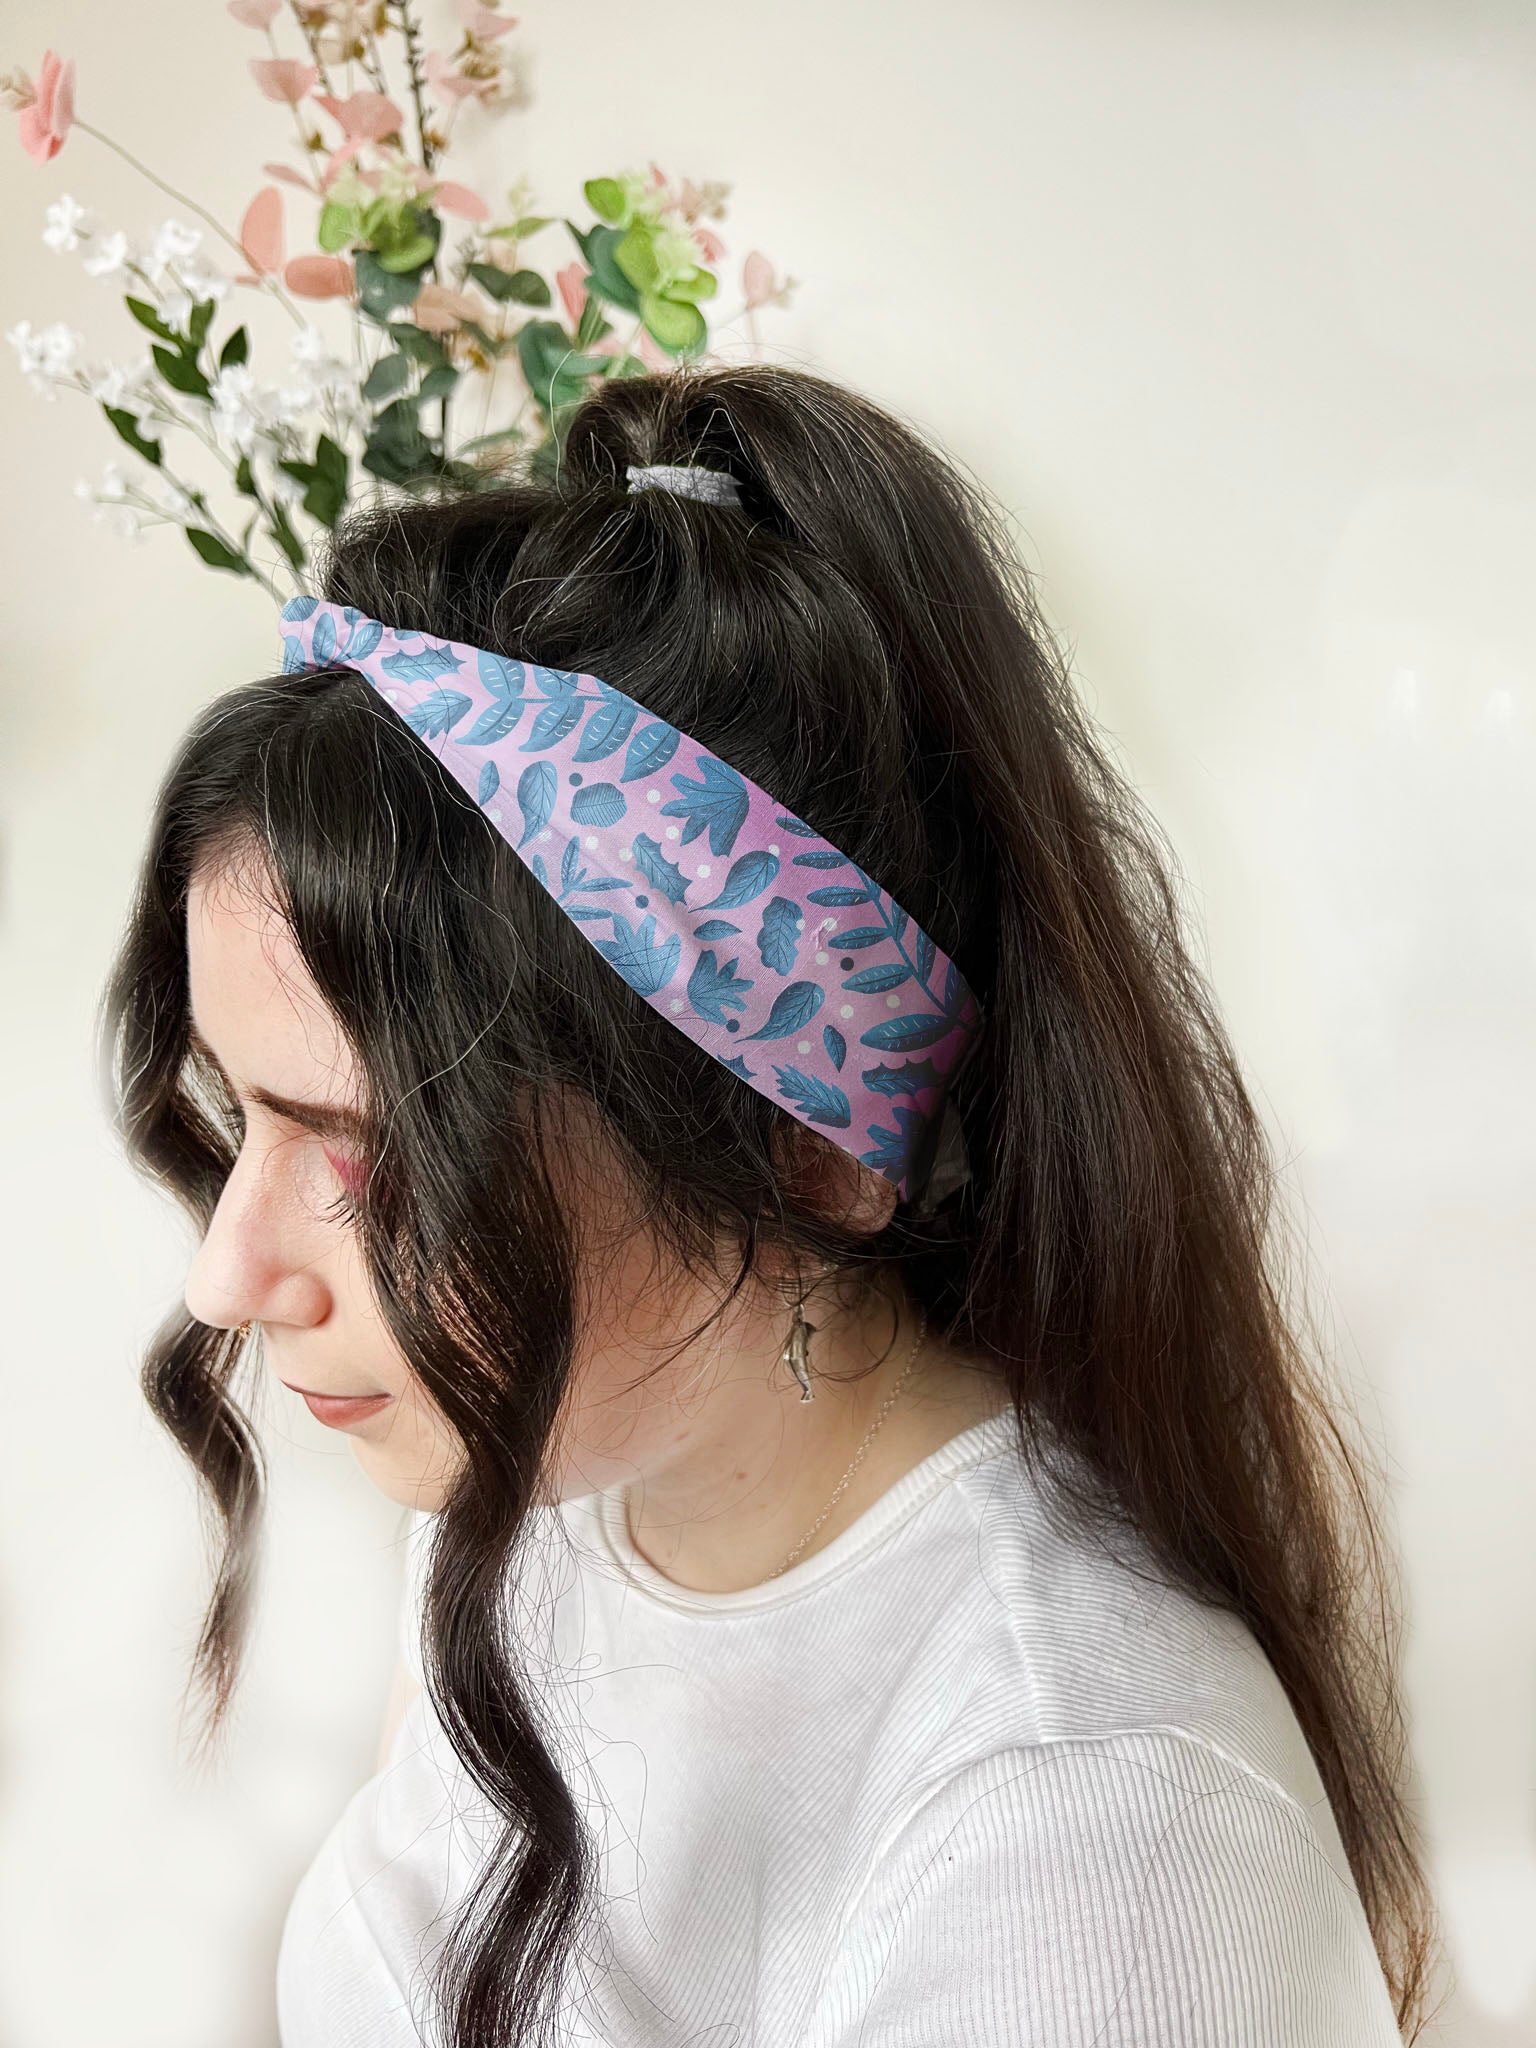 Dark haired girl wears a headband with a ponytail behind her head. The headband has blue foliage leaves illustrated on it with a pink background on the fabric. The headband has a knot at the front.